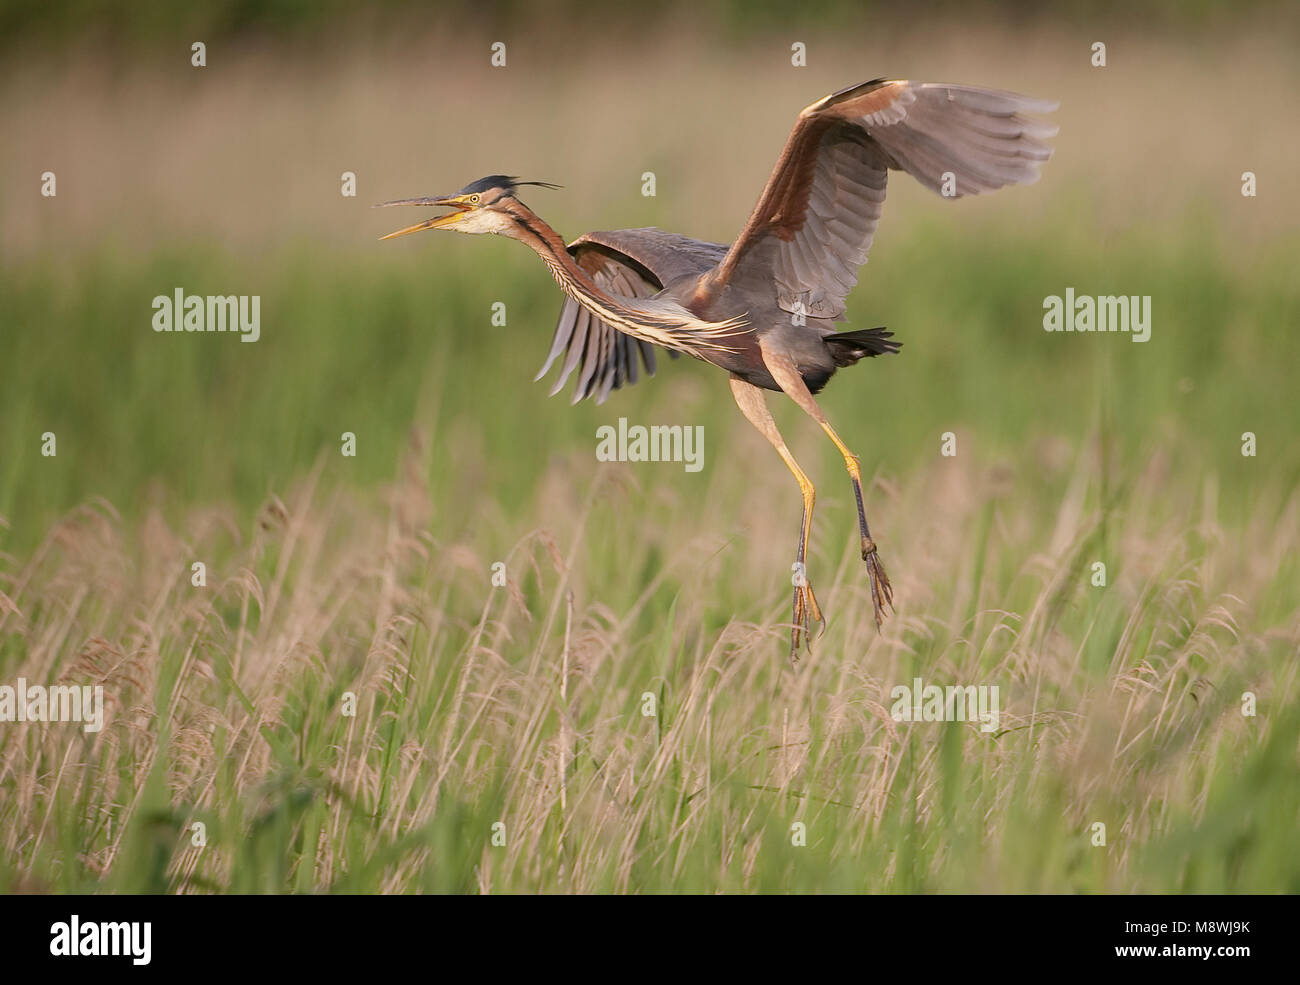 Purperreiger roepend en opvliegend; Purple Heron calling and flying up Stock Photo